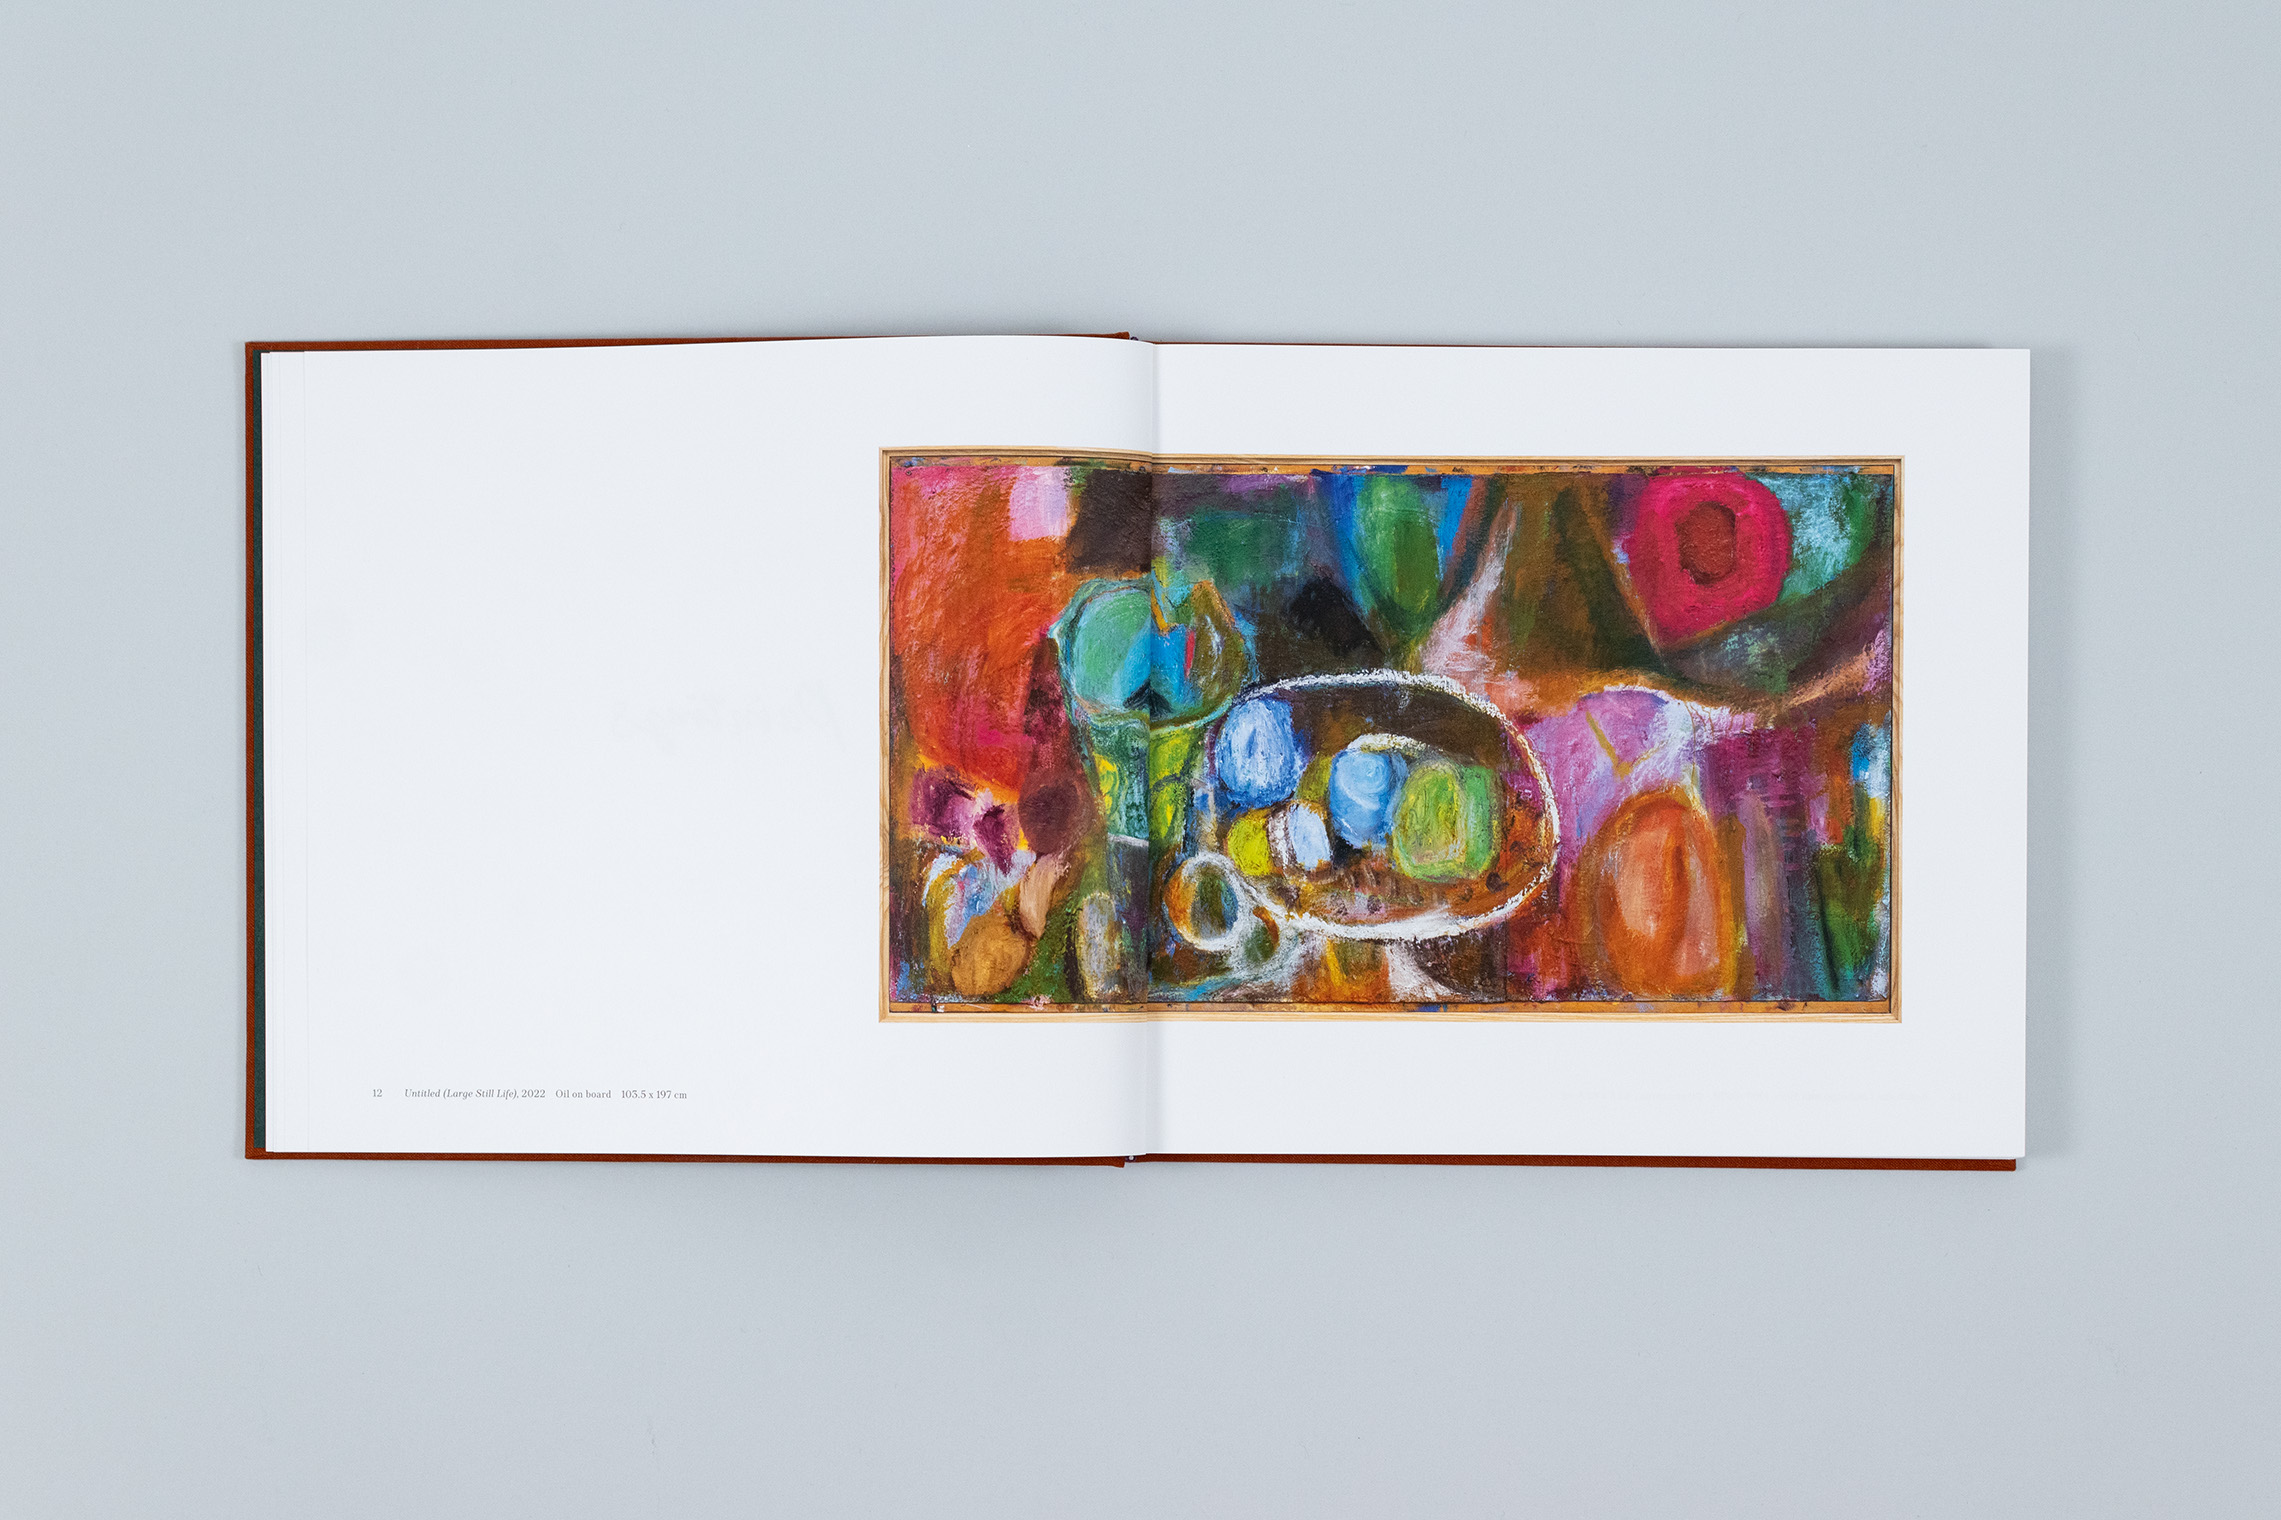 Carole Gibbons monograph spread with a large still life oil painting over both pages